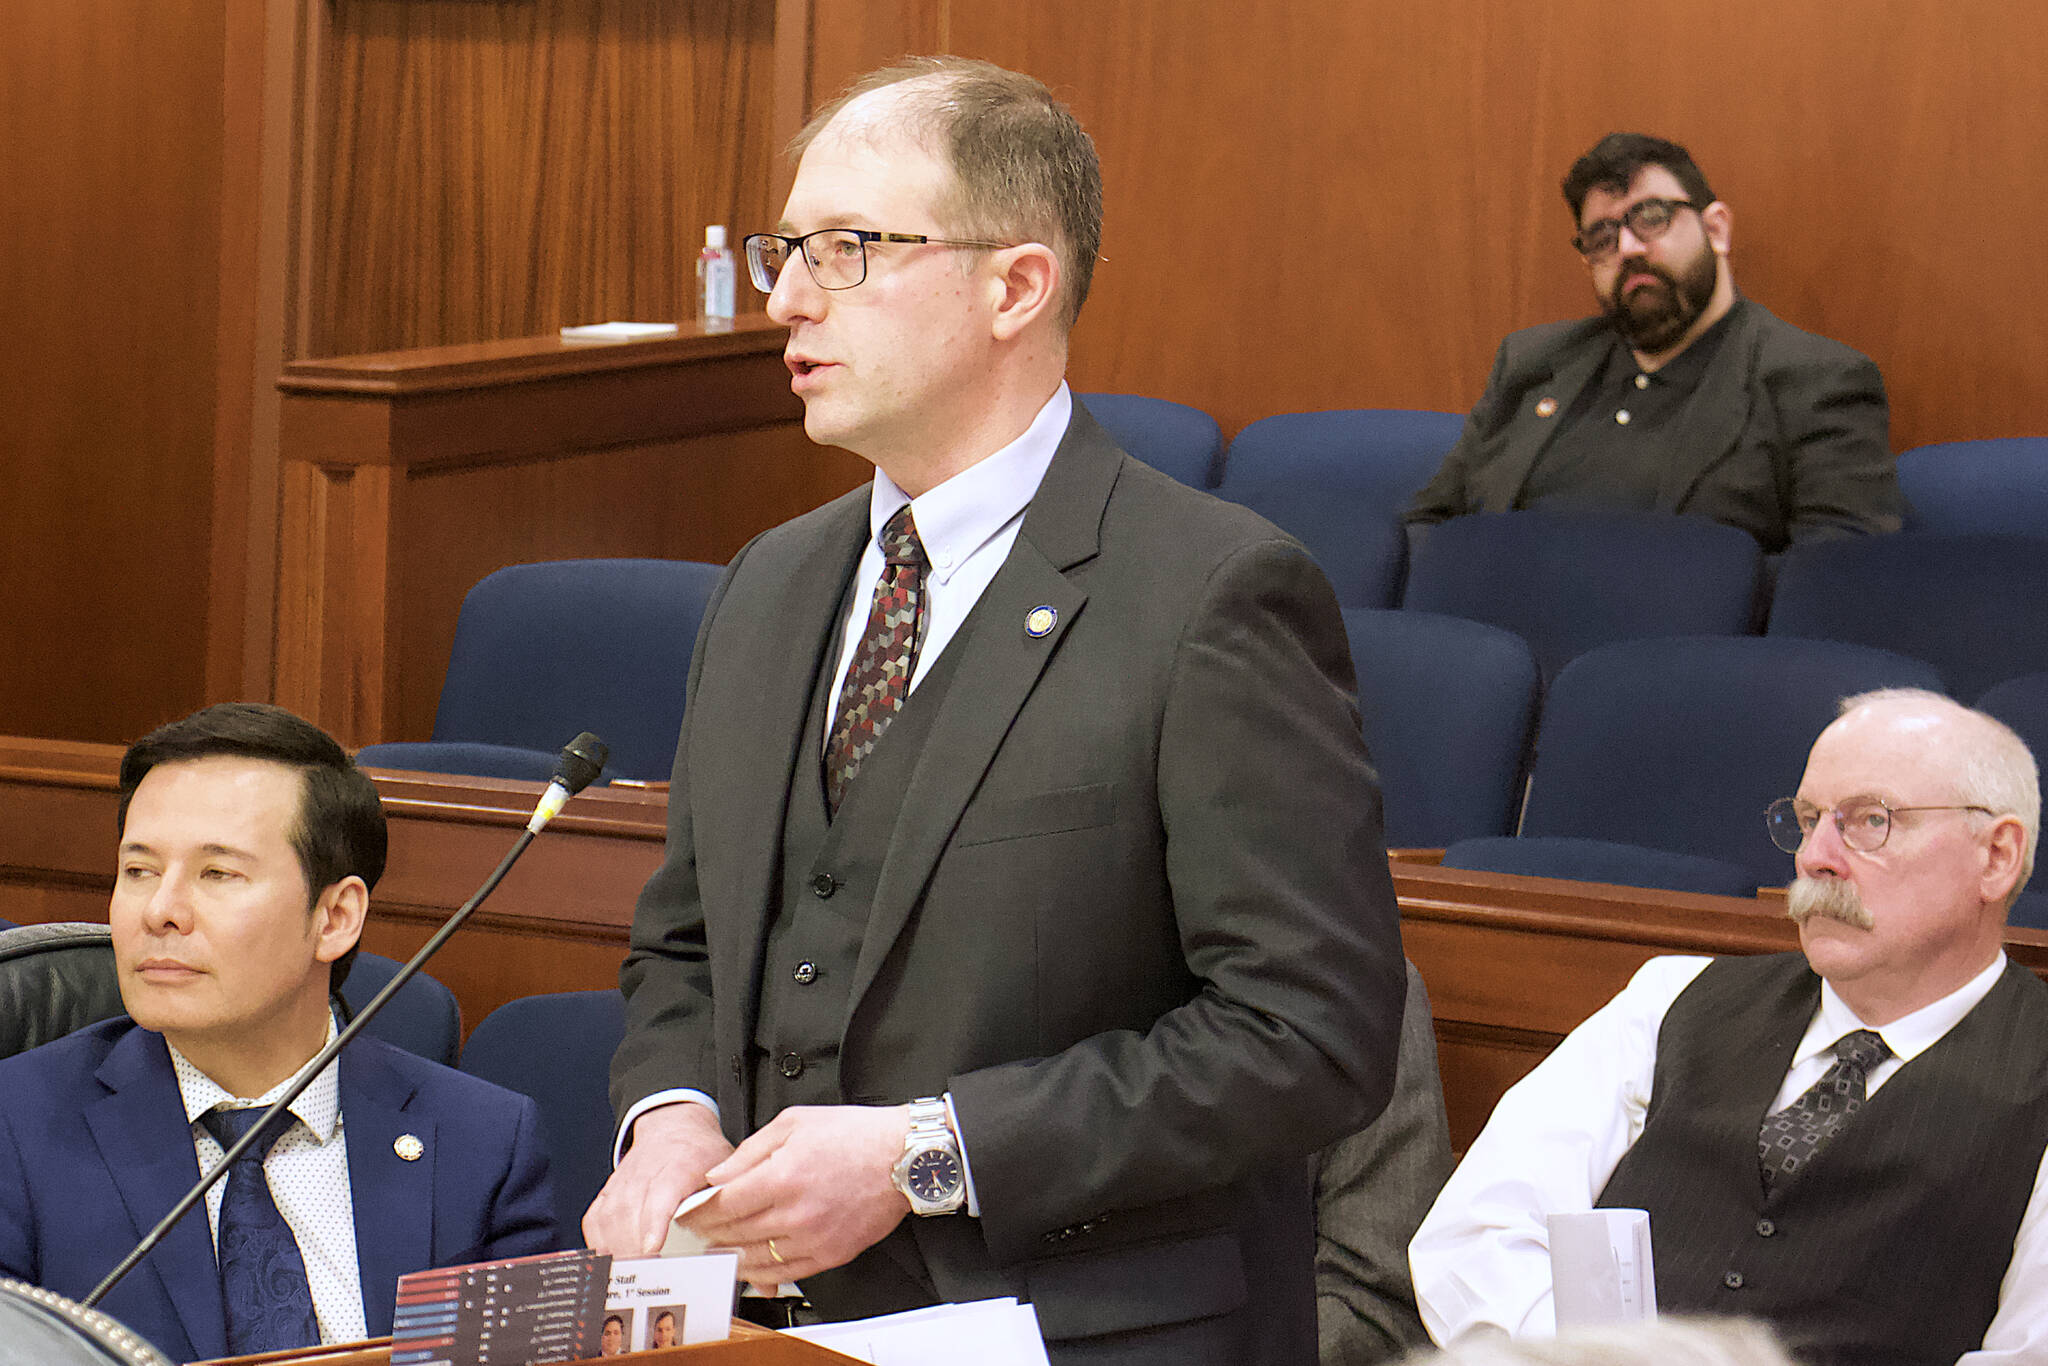 State Sen. Jesse Kiehl, D-Juneau, explains during a joint Legislative session Tuesday why his previous experience working with Bethany Marcum is why he opposes her nomination to the University of Alaska’s Board of Regents. (Mark Sabbatini / Juneau Empire)